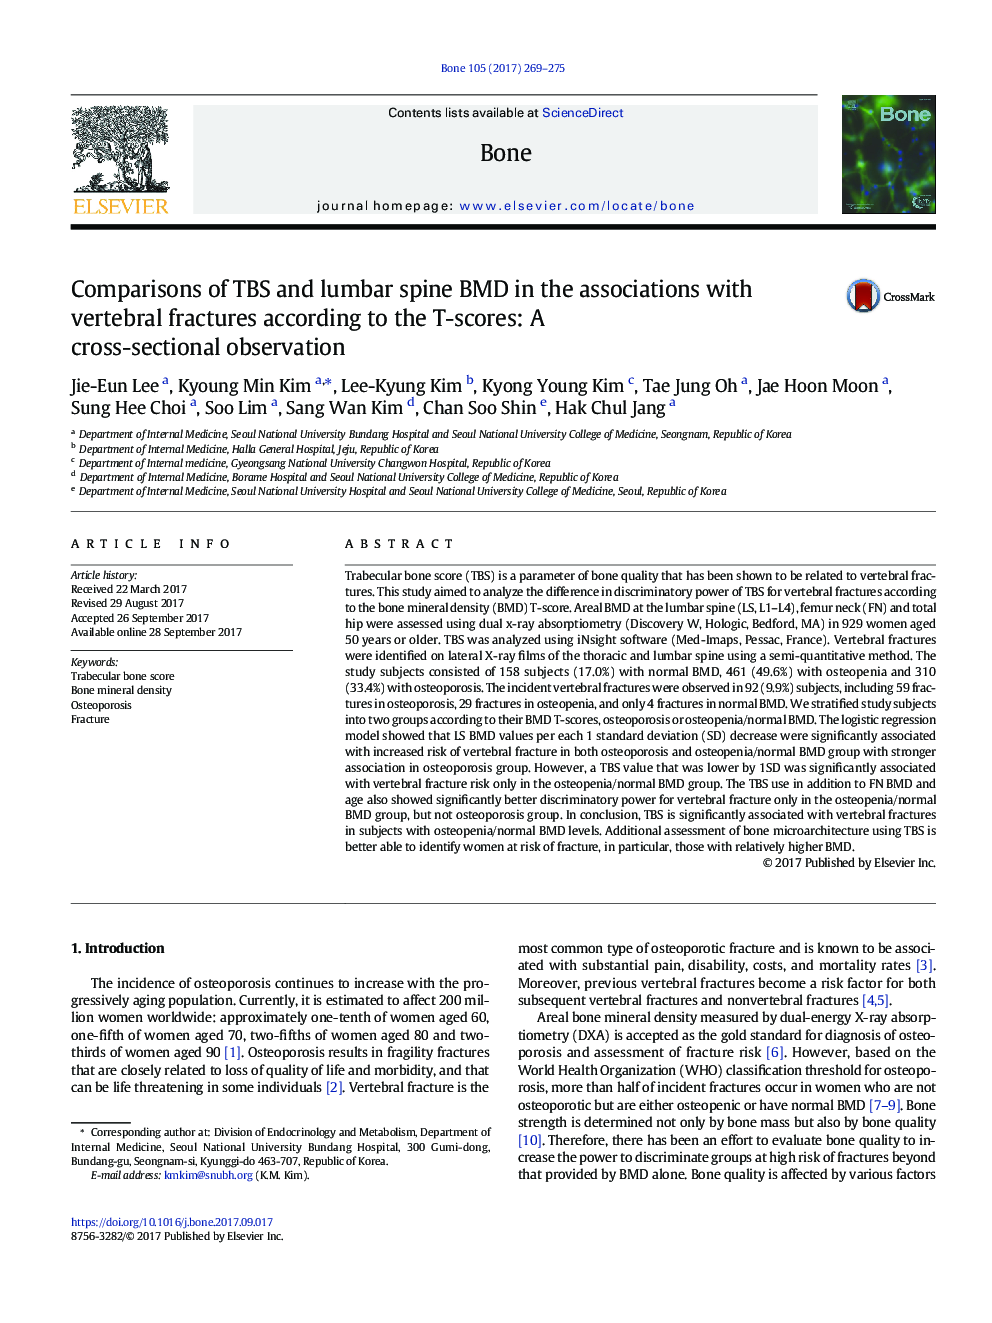 Comparisons of TBS and lumbar spine BMD in the associations with vertebral fractures according to the T-scores: A cross-sectional observation